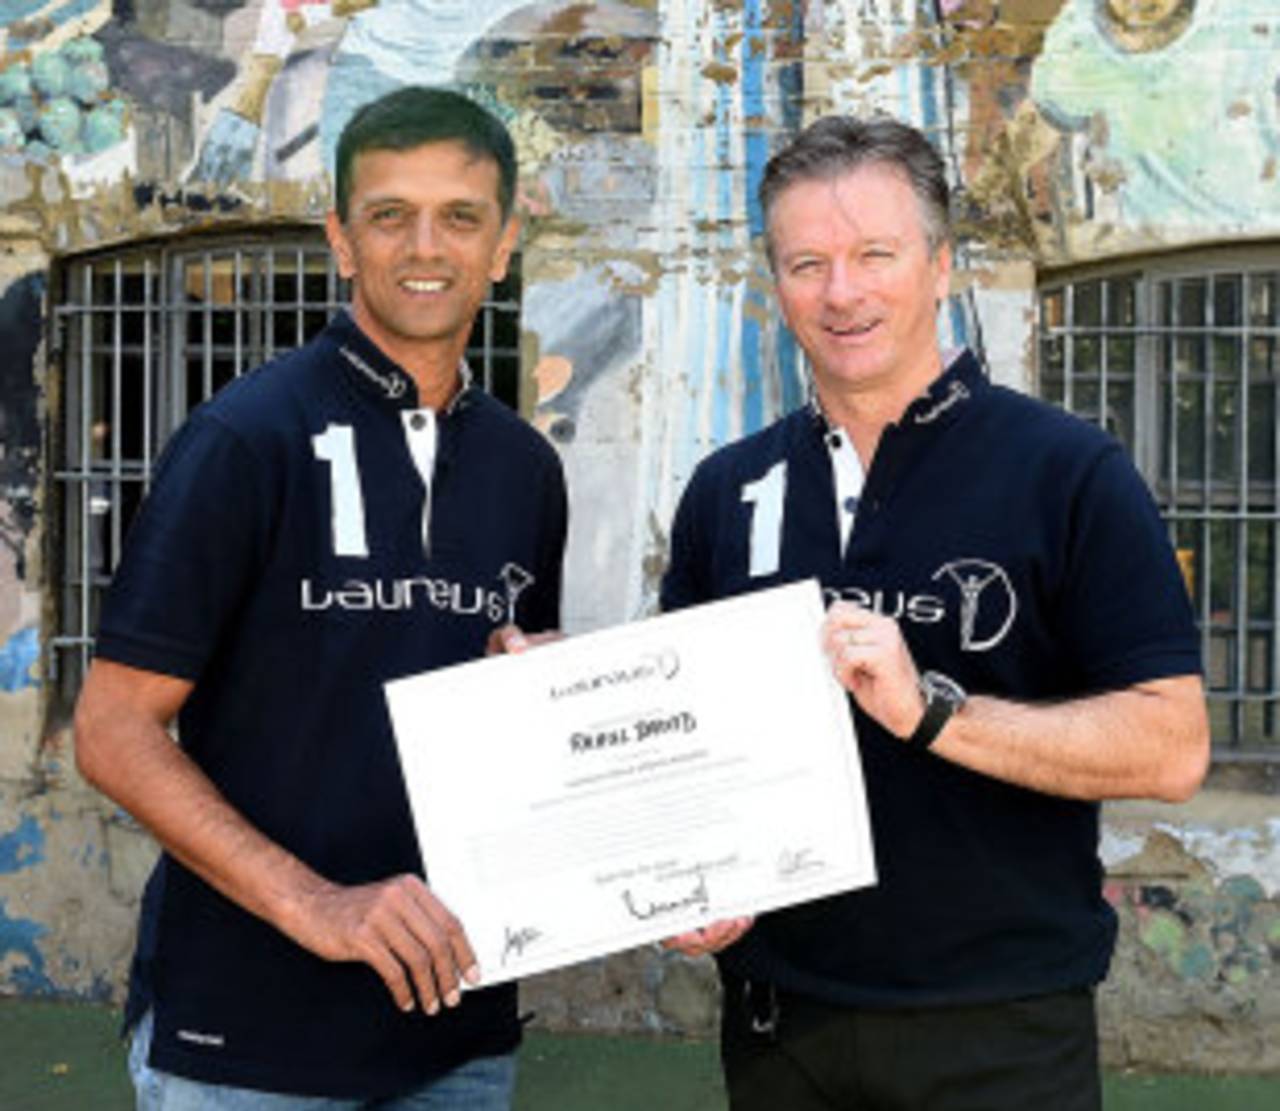 Steve Waugh with Rahul Dravid after the latter was inducted into the Laureus Sport for Good Foundation, London, July 16, 2014